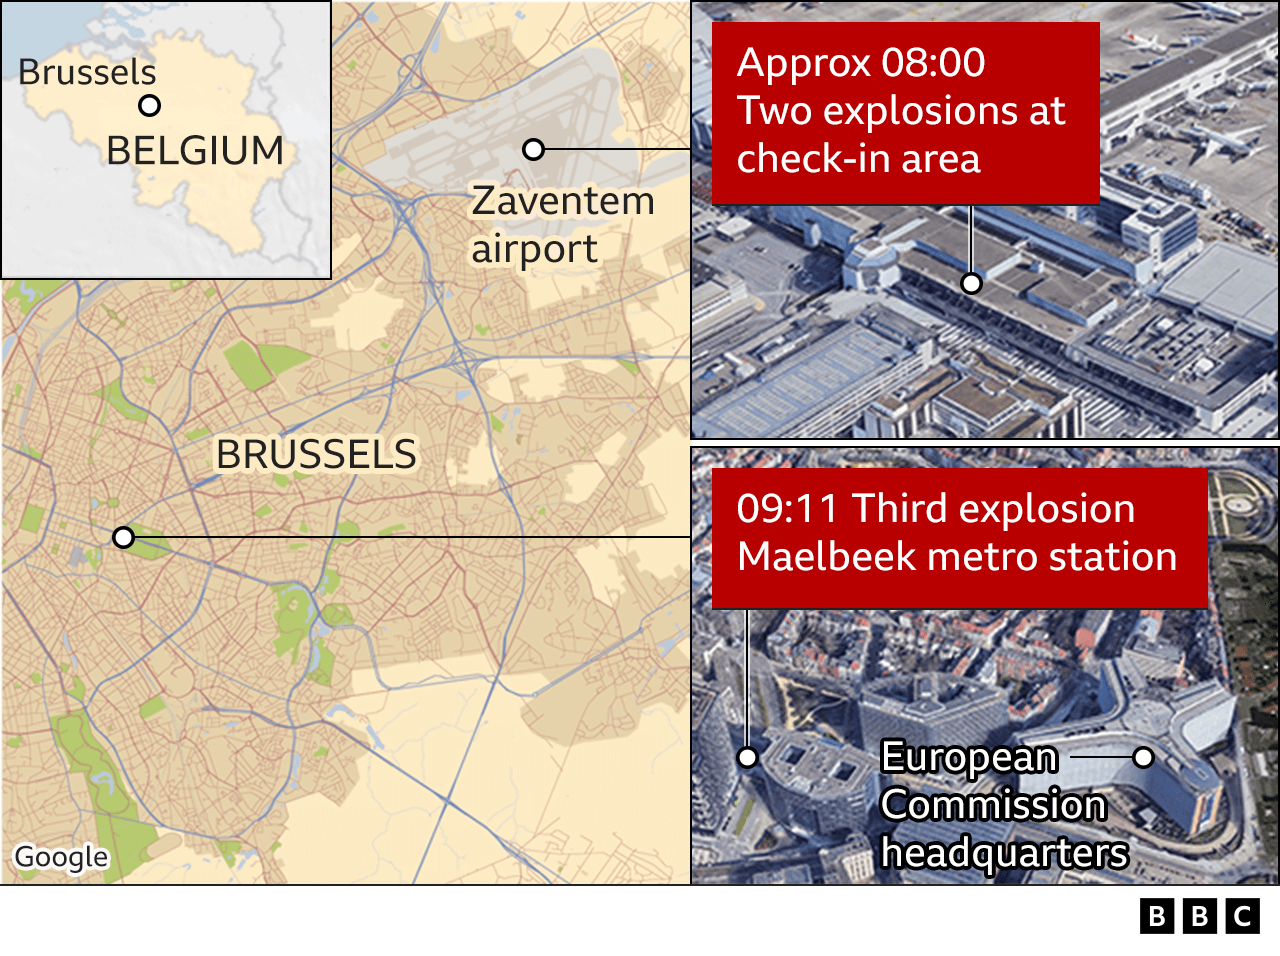 Map of Brussels attack